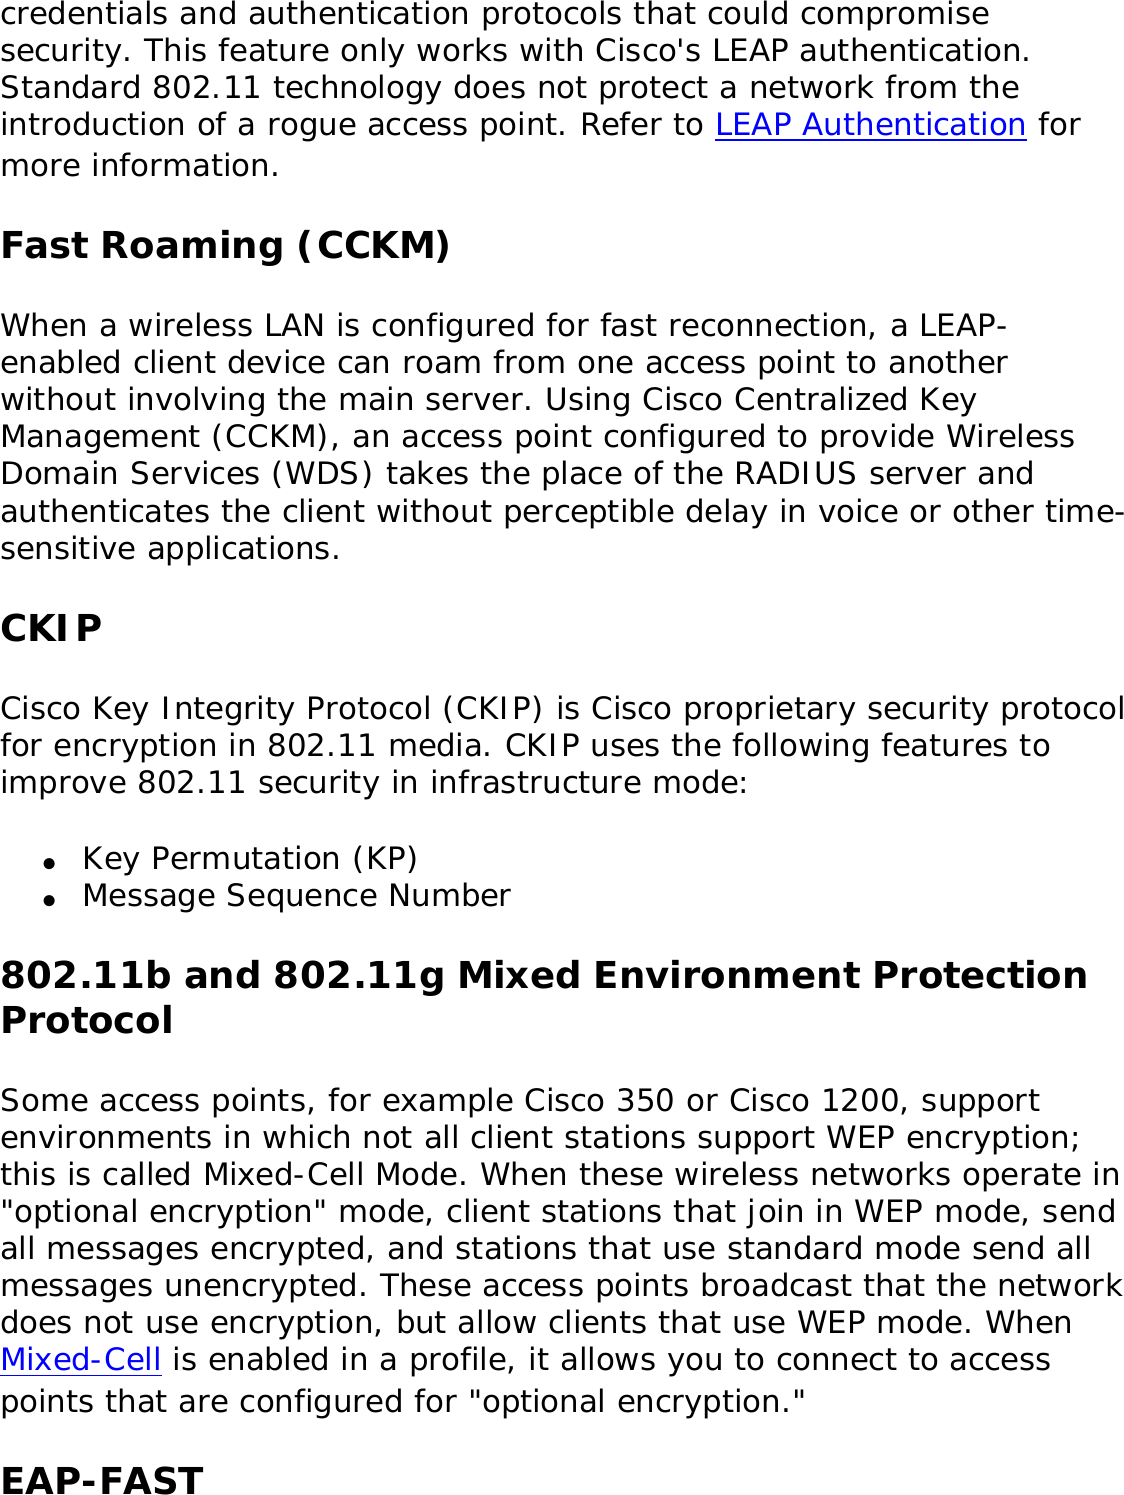 credentials and authentication protocols that could compromise security. This feature only works with Cisco&apos;s LEAP authentication. Standard 802.11 technology does not protect a network from the introduction of a rogue access point. Refer to LEAP Authentication for more information. Fast Roaming (CCKM)When a wireless LAN is configured for fast reconnection, a LEAP-enabled client device can roam from one access point to another without involving the main server. Using Cisco Centralized Key Management (CCKM), an access point configured to provide Wireless Domain Services (WDS) takes the place of the RADIUS server and authenticates the client without perceptible delay in voice or other time-sensitive applications. CKIPCisco Key Integrity Protocol (CKIP) is Cisco proprietary security protocol for encryption in 802.11 media. CKIP uses the following features to improve 802.11 security in infrastructure mode: ●     Key Permutation (KP) ●     Message Sequence Number 802.11b and 802.11g Mixed Environment Protection ProtocolSome access points, for example Cisco 350 or Cisco 1200, support environments in which not all client stations support WEP encryption; this is called Mixed-Cell Mode. When these wireless networks operate in &quot;optional encryption&quot; mode, client stations that join in WEP mode, send all messages encrypted, and stations that use standard mode send all messages unencrypted. These access points broadcast that the network does not use encryption, but allow clients that use WEP mode. When Mixed-Cell is enabled in a profile, it allows you to connect to access points that are configured for &quot;optional encryption.&quot; EAP-FAST